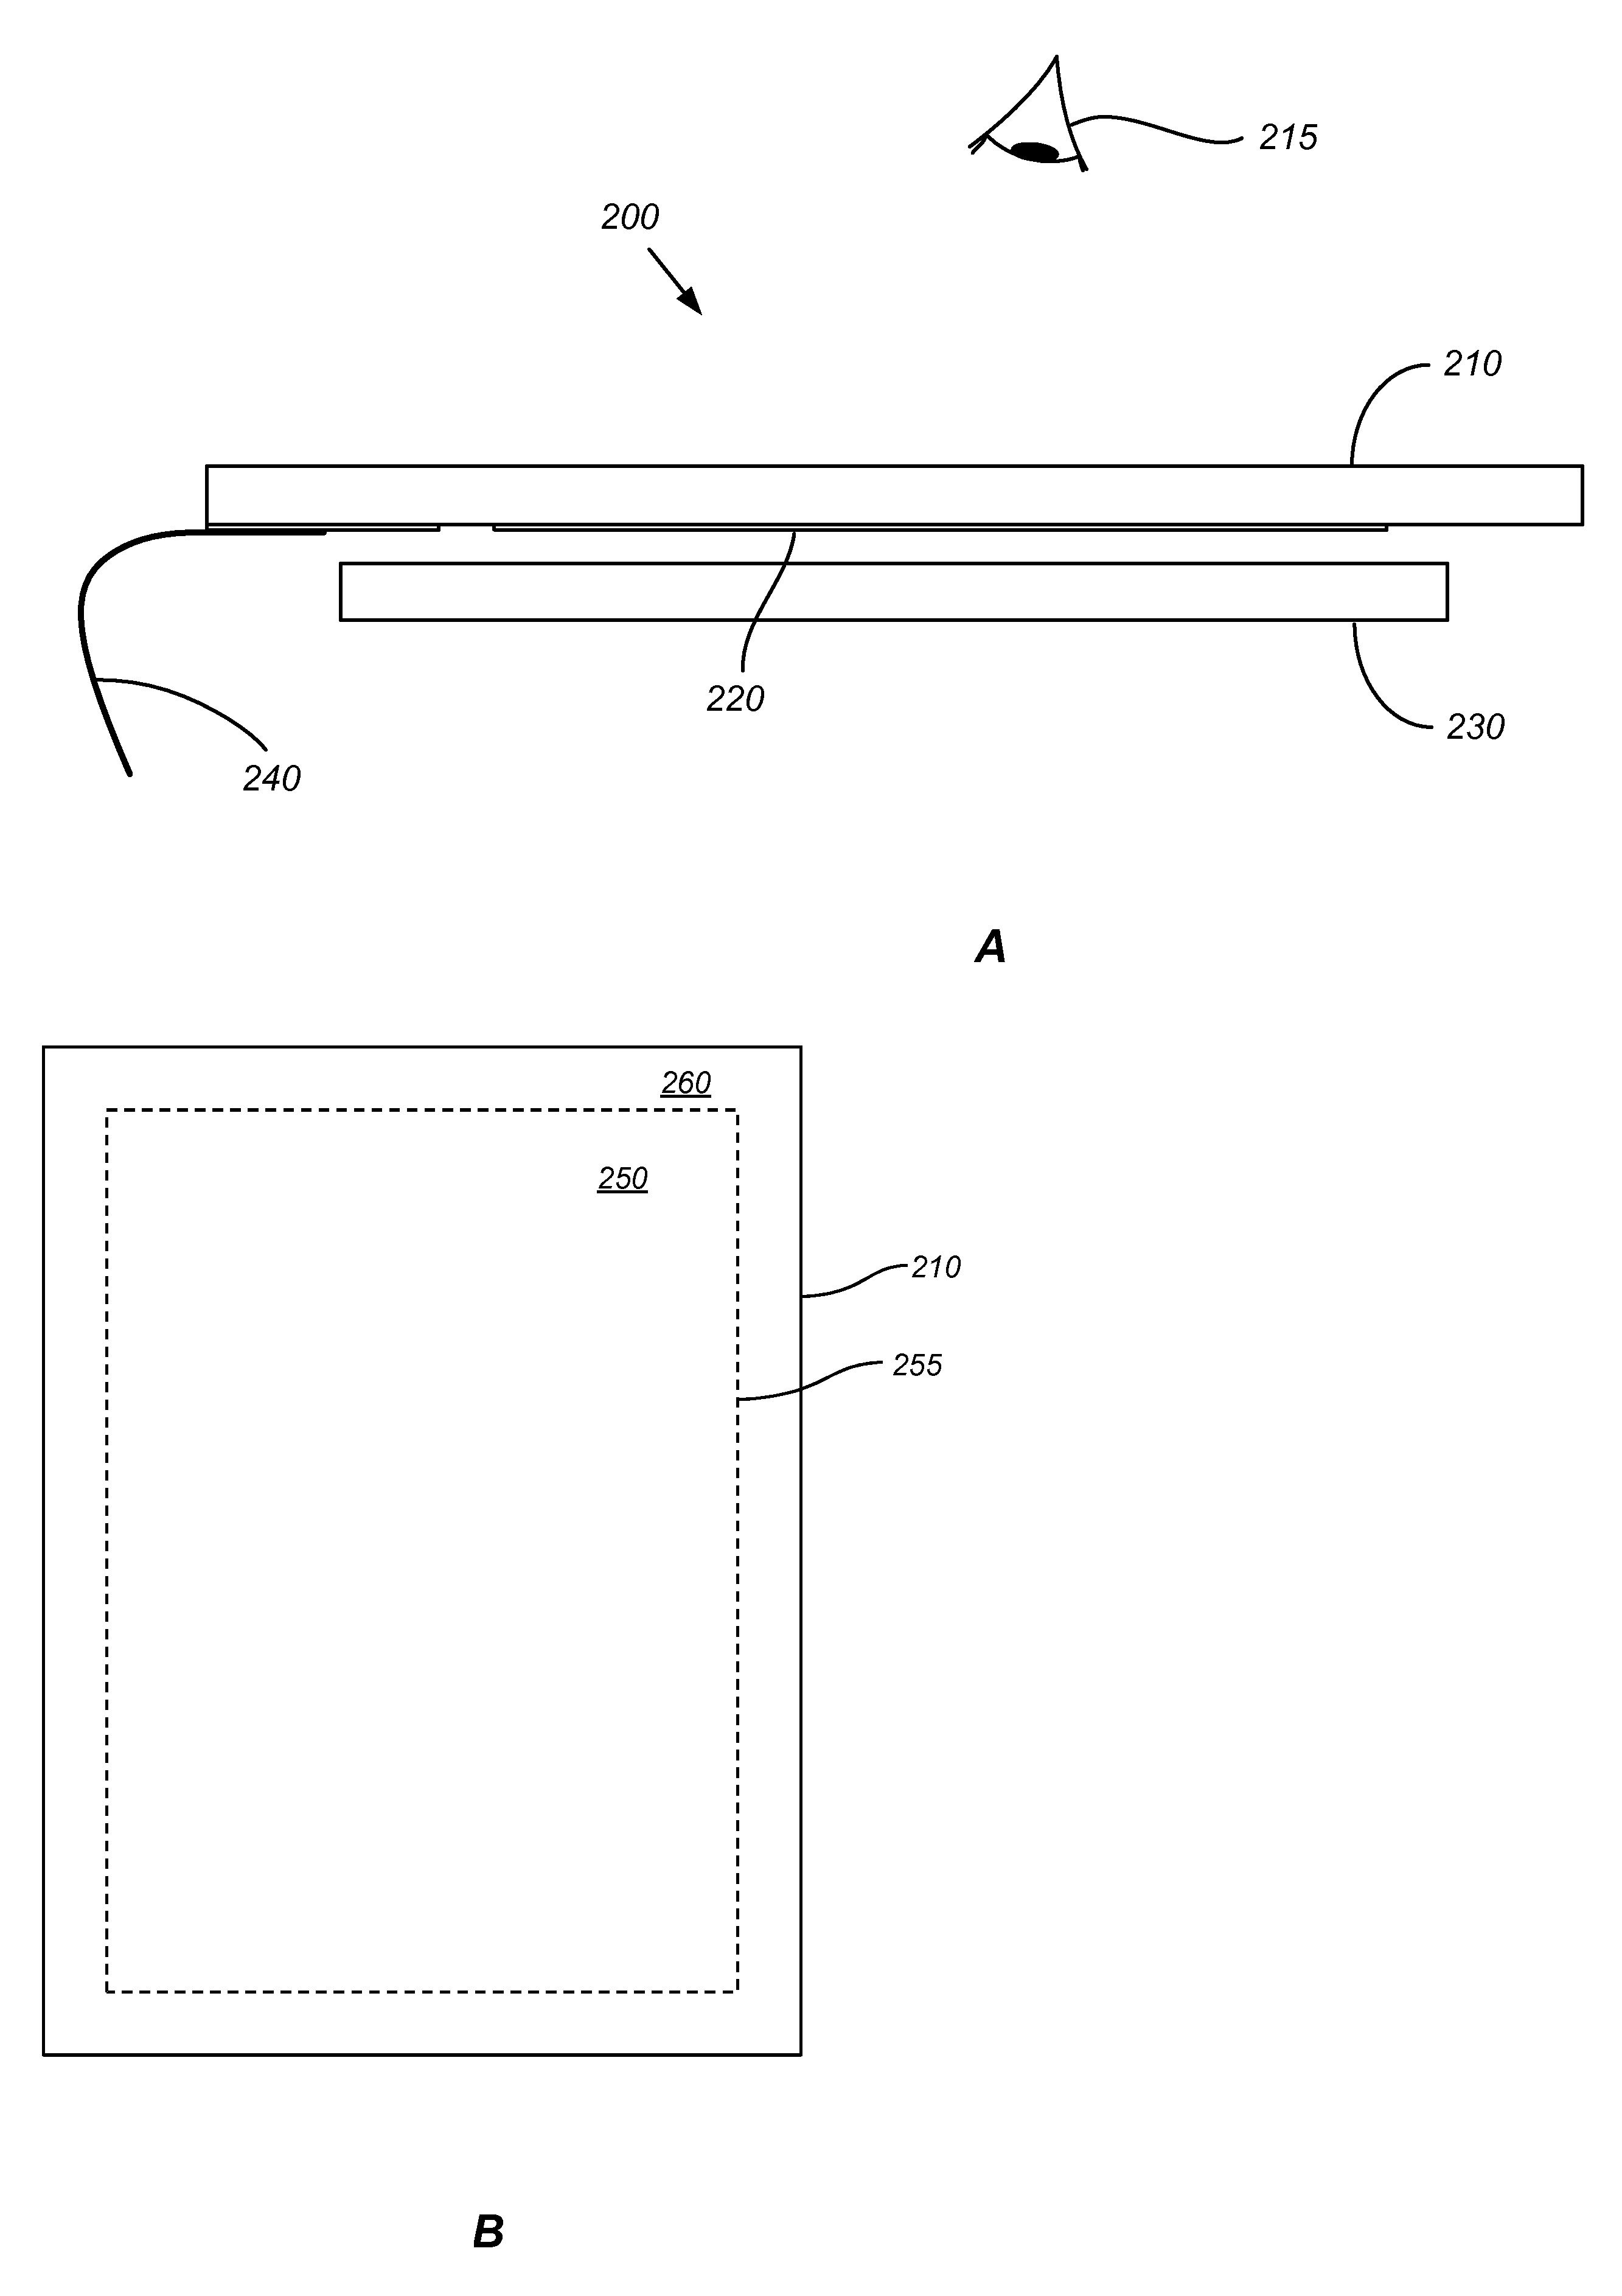 Transparent antennas on a display device